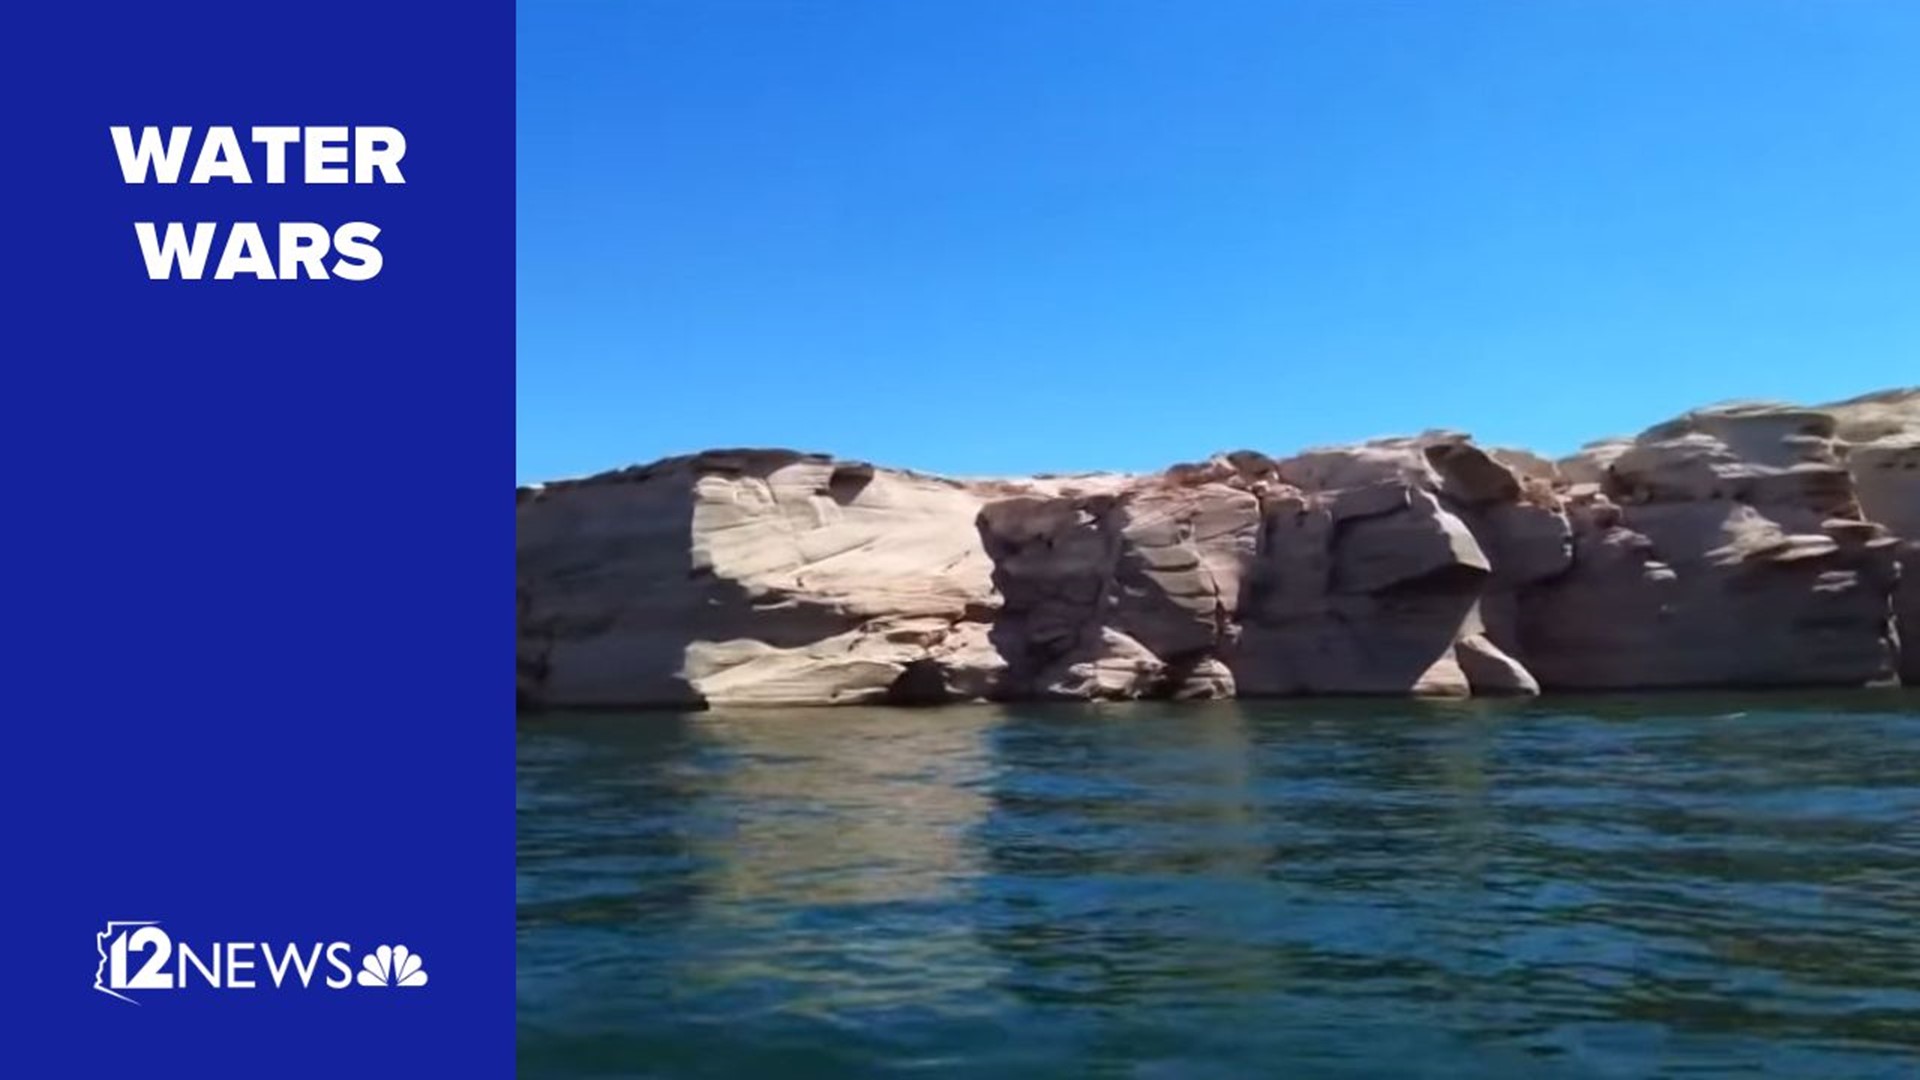 What if, instead of trying to keep Lake Powell filled, we just let it drain?